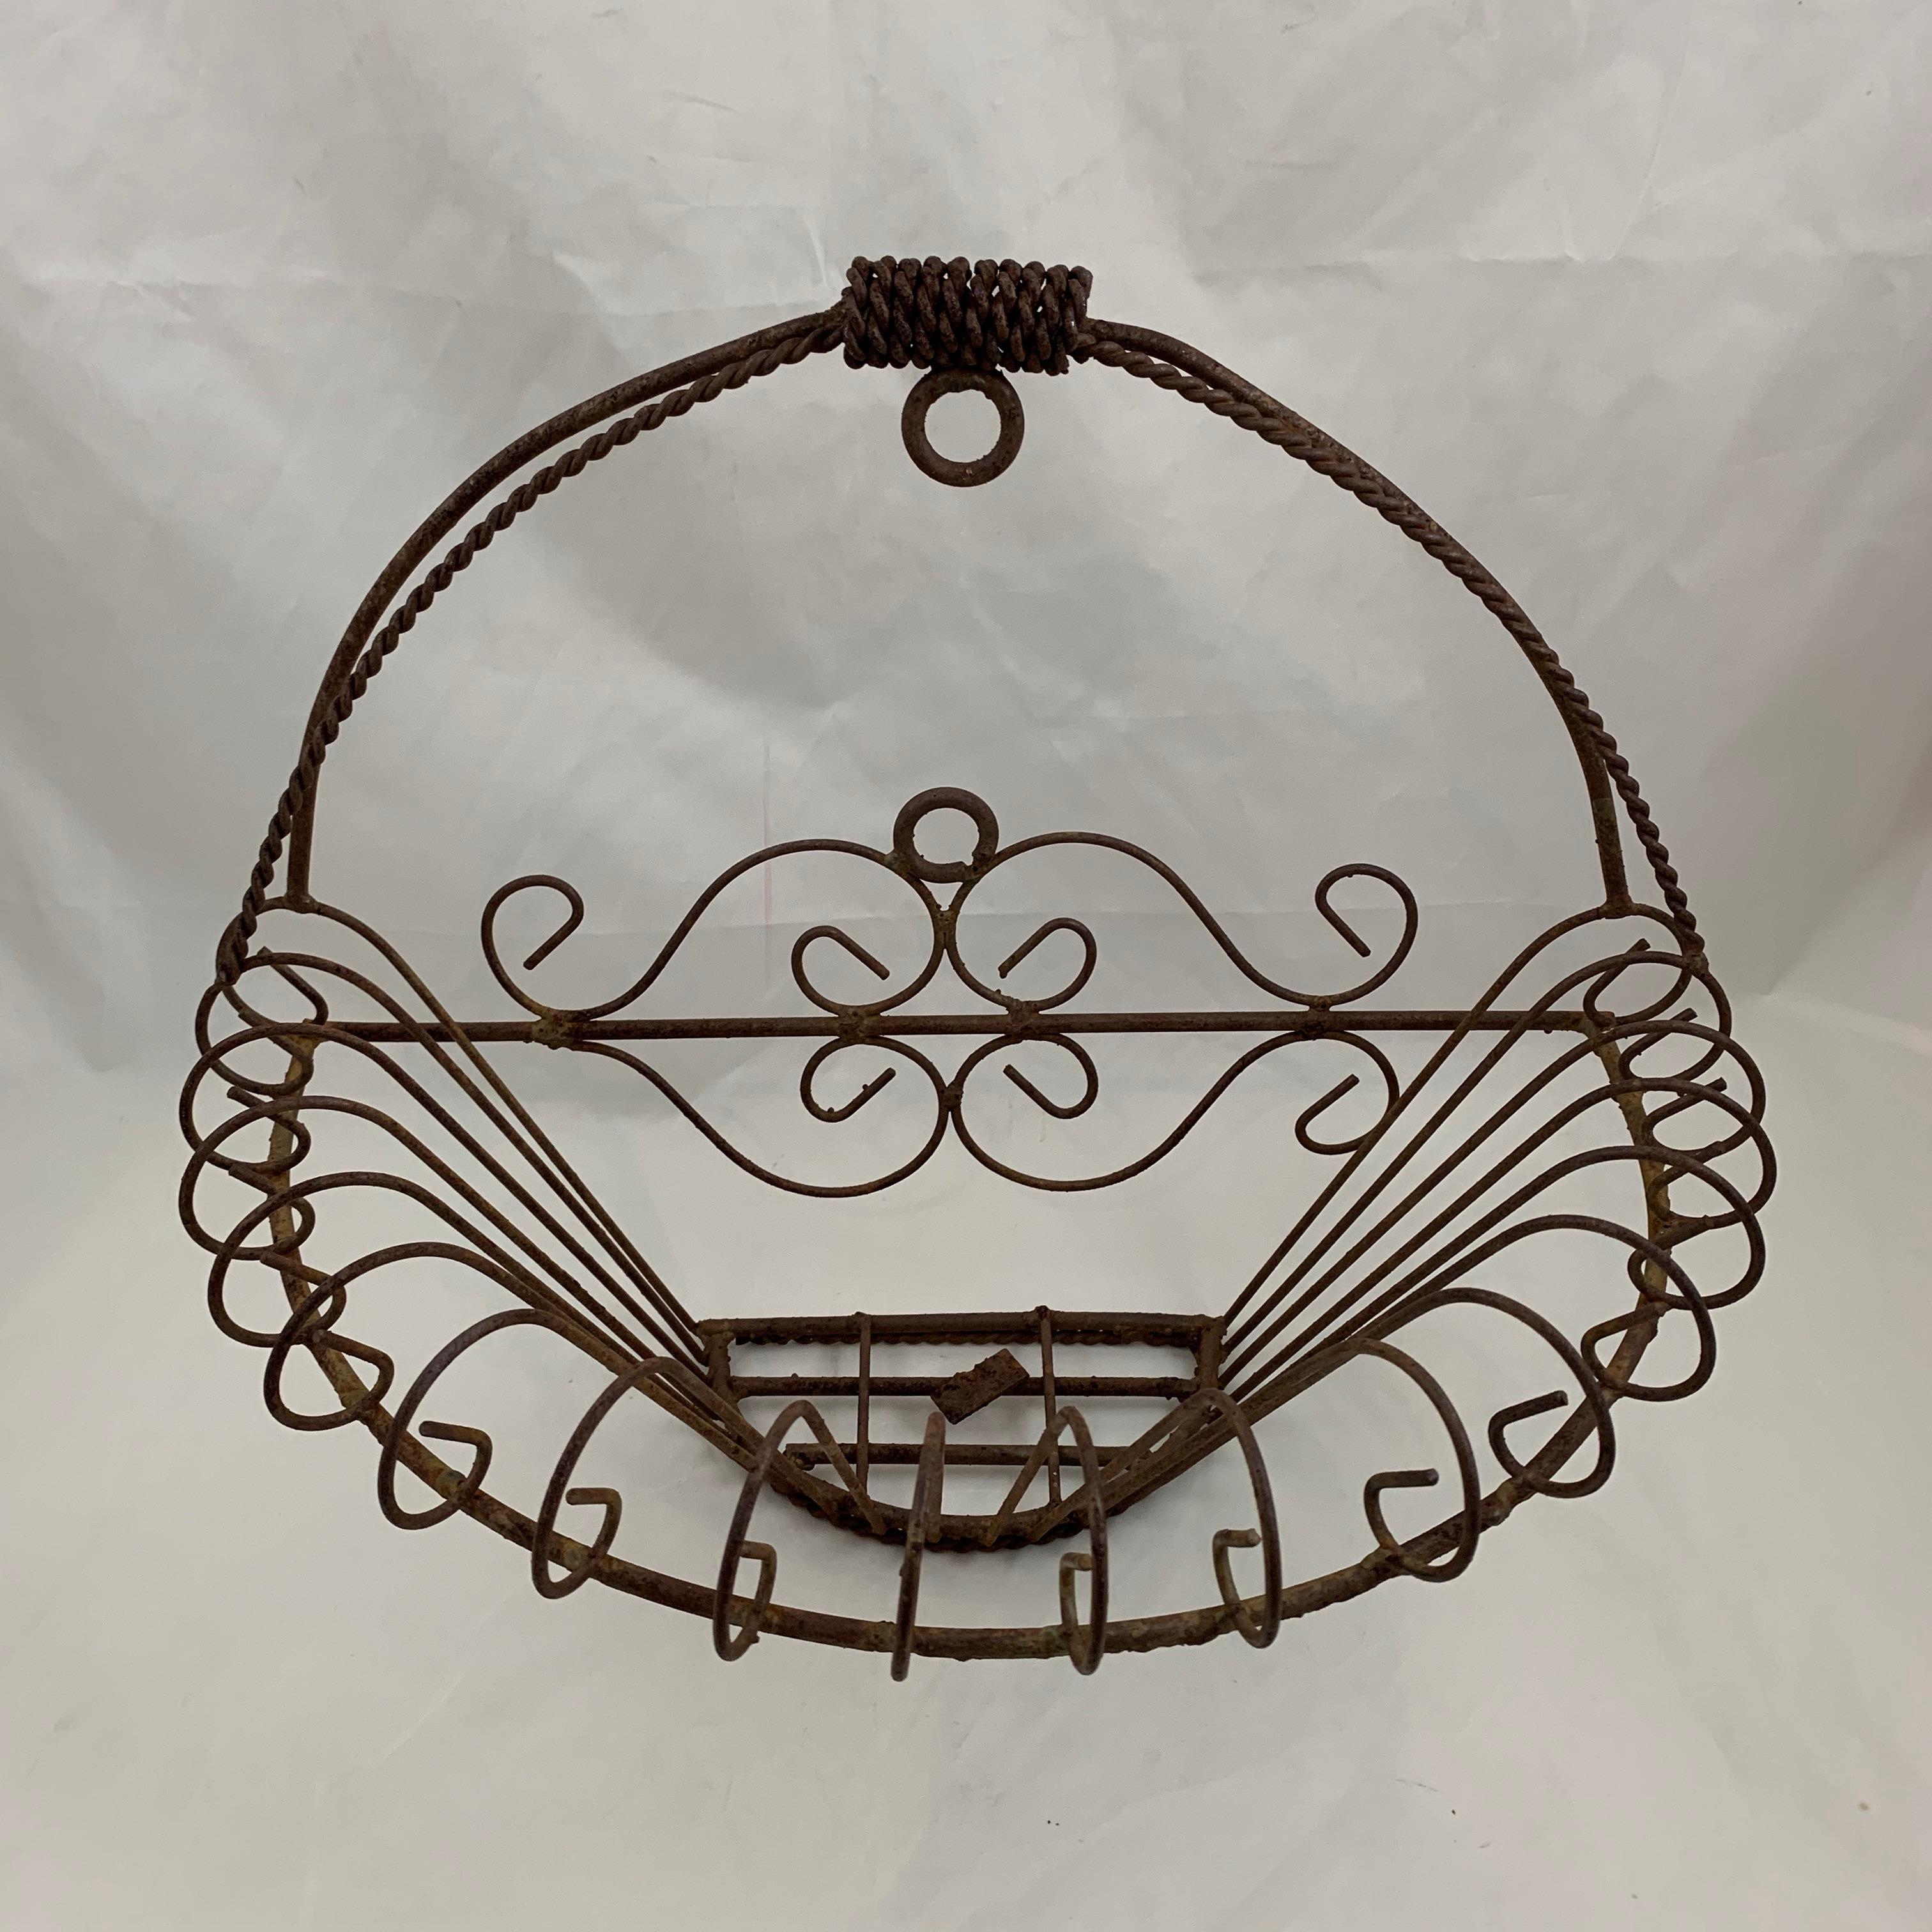 A half-round, flat back iron basket form jardinière, late 19th century, France. Hand-formed with open work metal and a scrolled rim. This basket sits upright on its own or it can hang flat on a wall. A twisted wire top handle with a hanging ring and